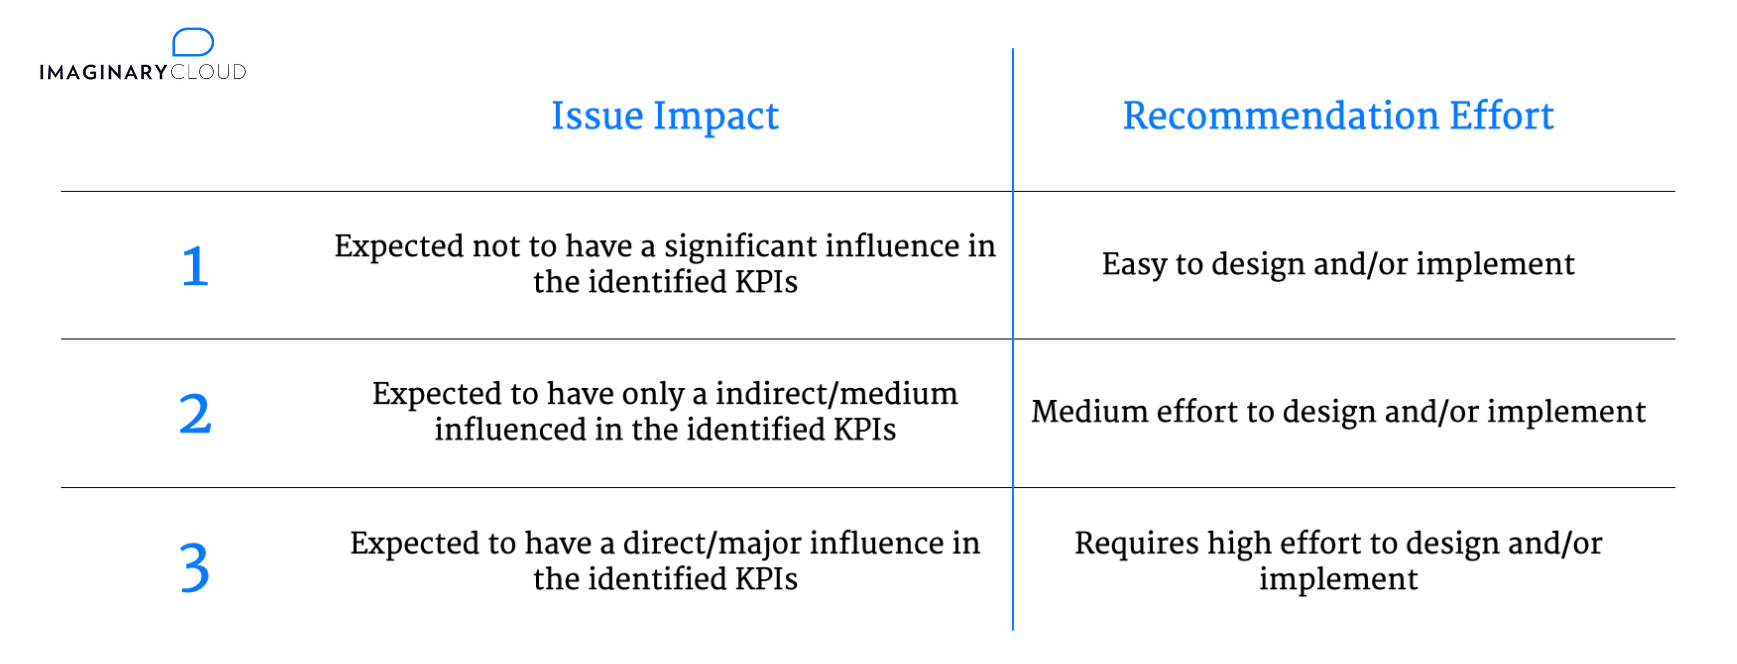 UX Audit - Issue Impact and Recommendation Effort Scores